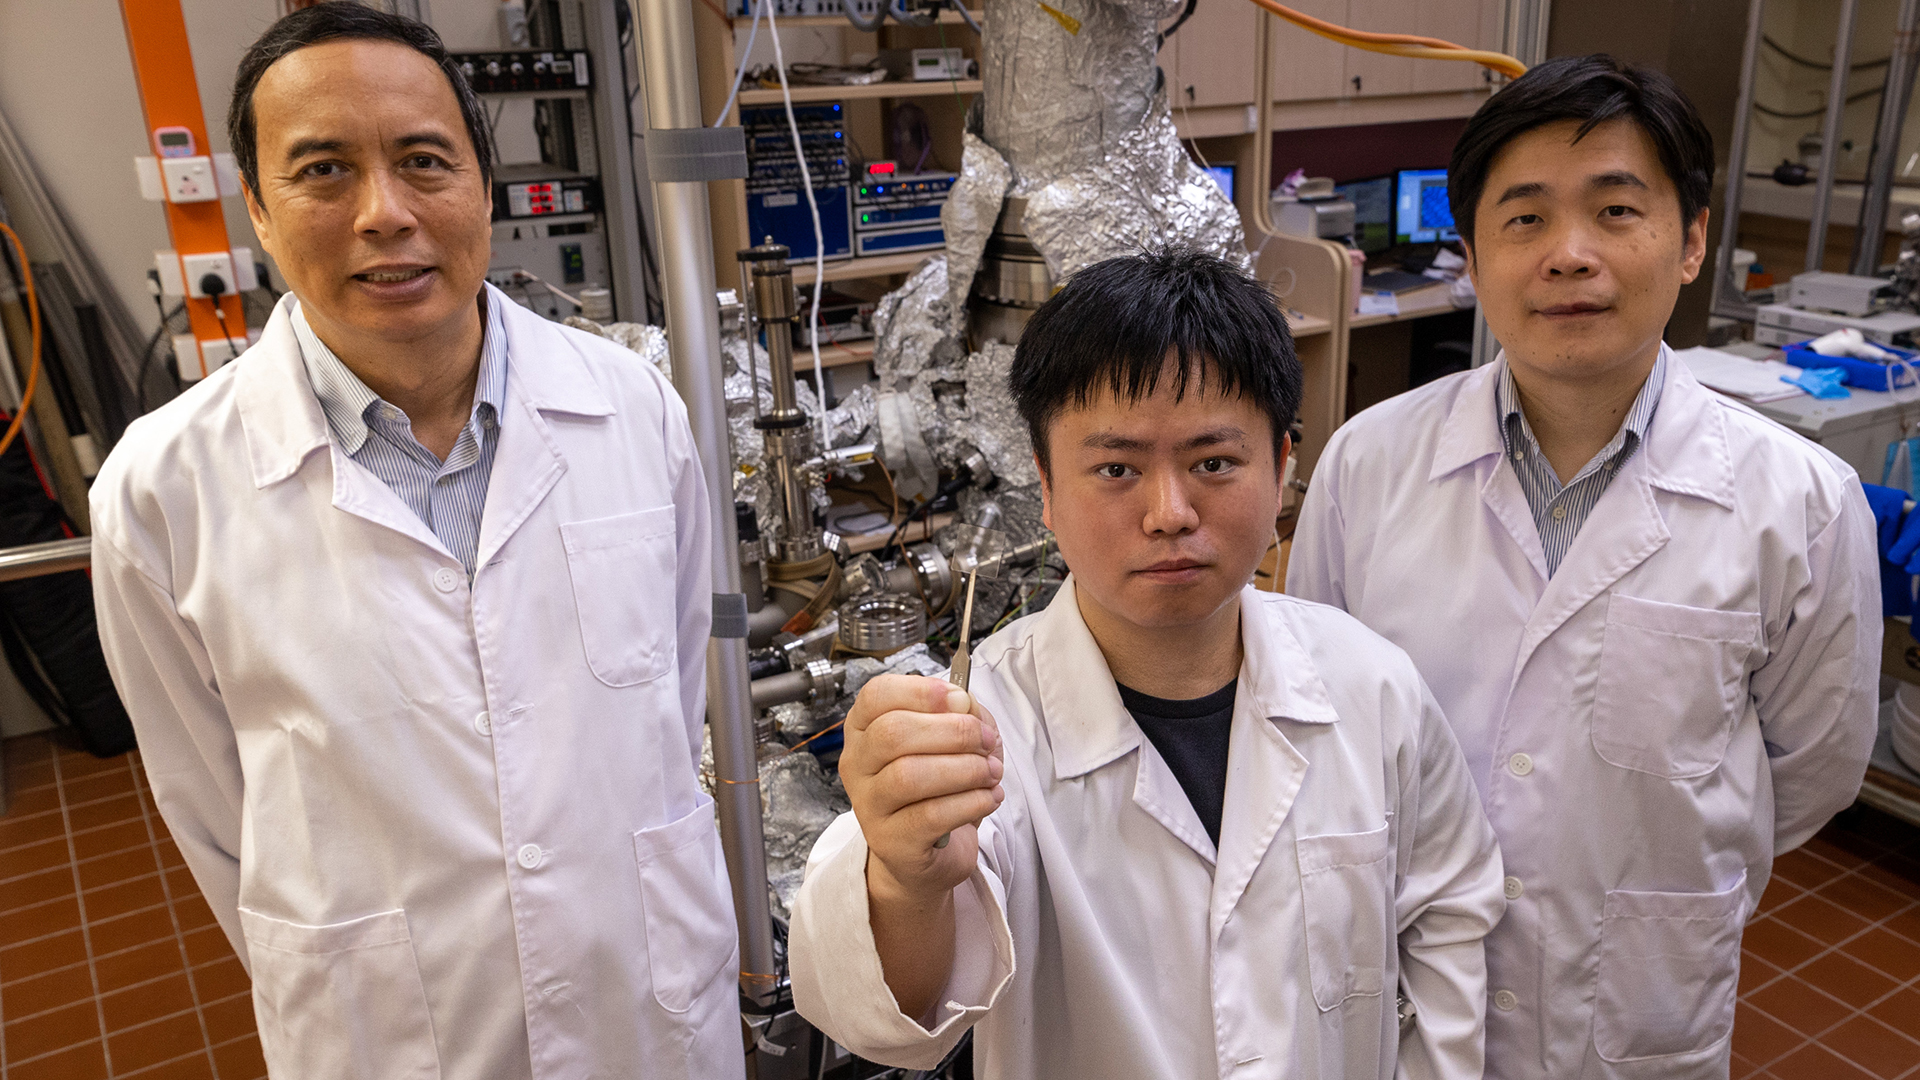 Researchers behind the discovery: From right to left, Associate Professor Cheng-Wei Qiu and Dr. Qiangbing Guo (Dept of Electrical and Computer Engineering), with Professor Andrew T. S. Wee (NUS Physics)